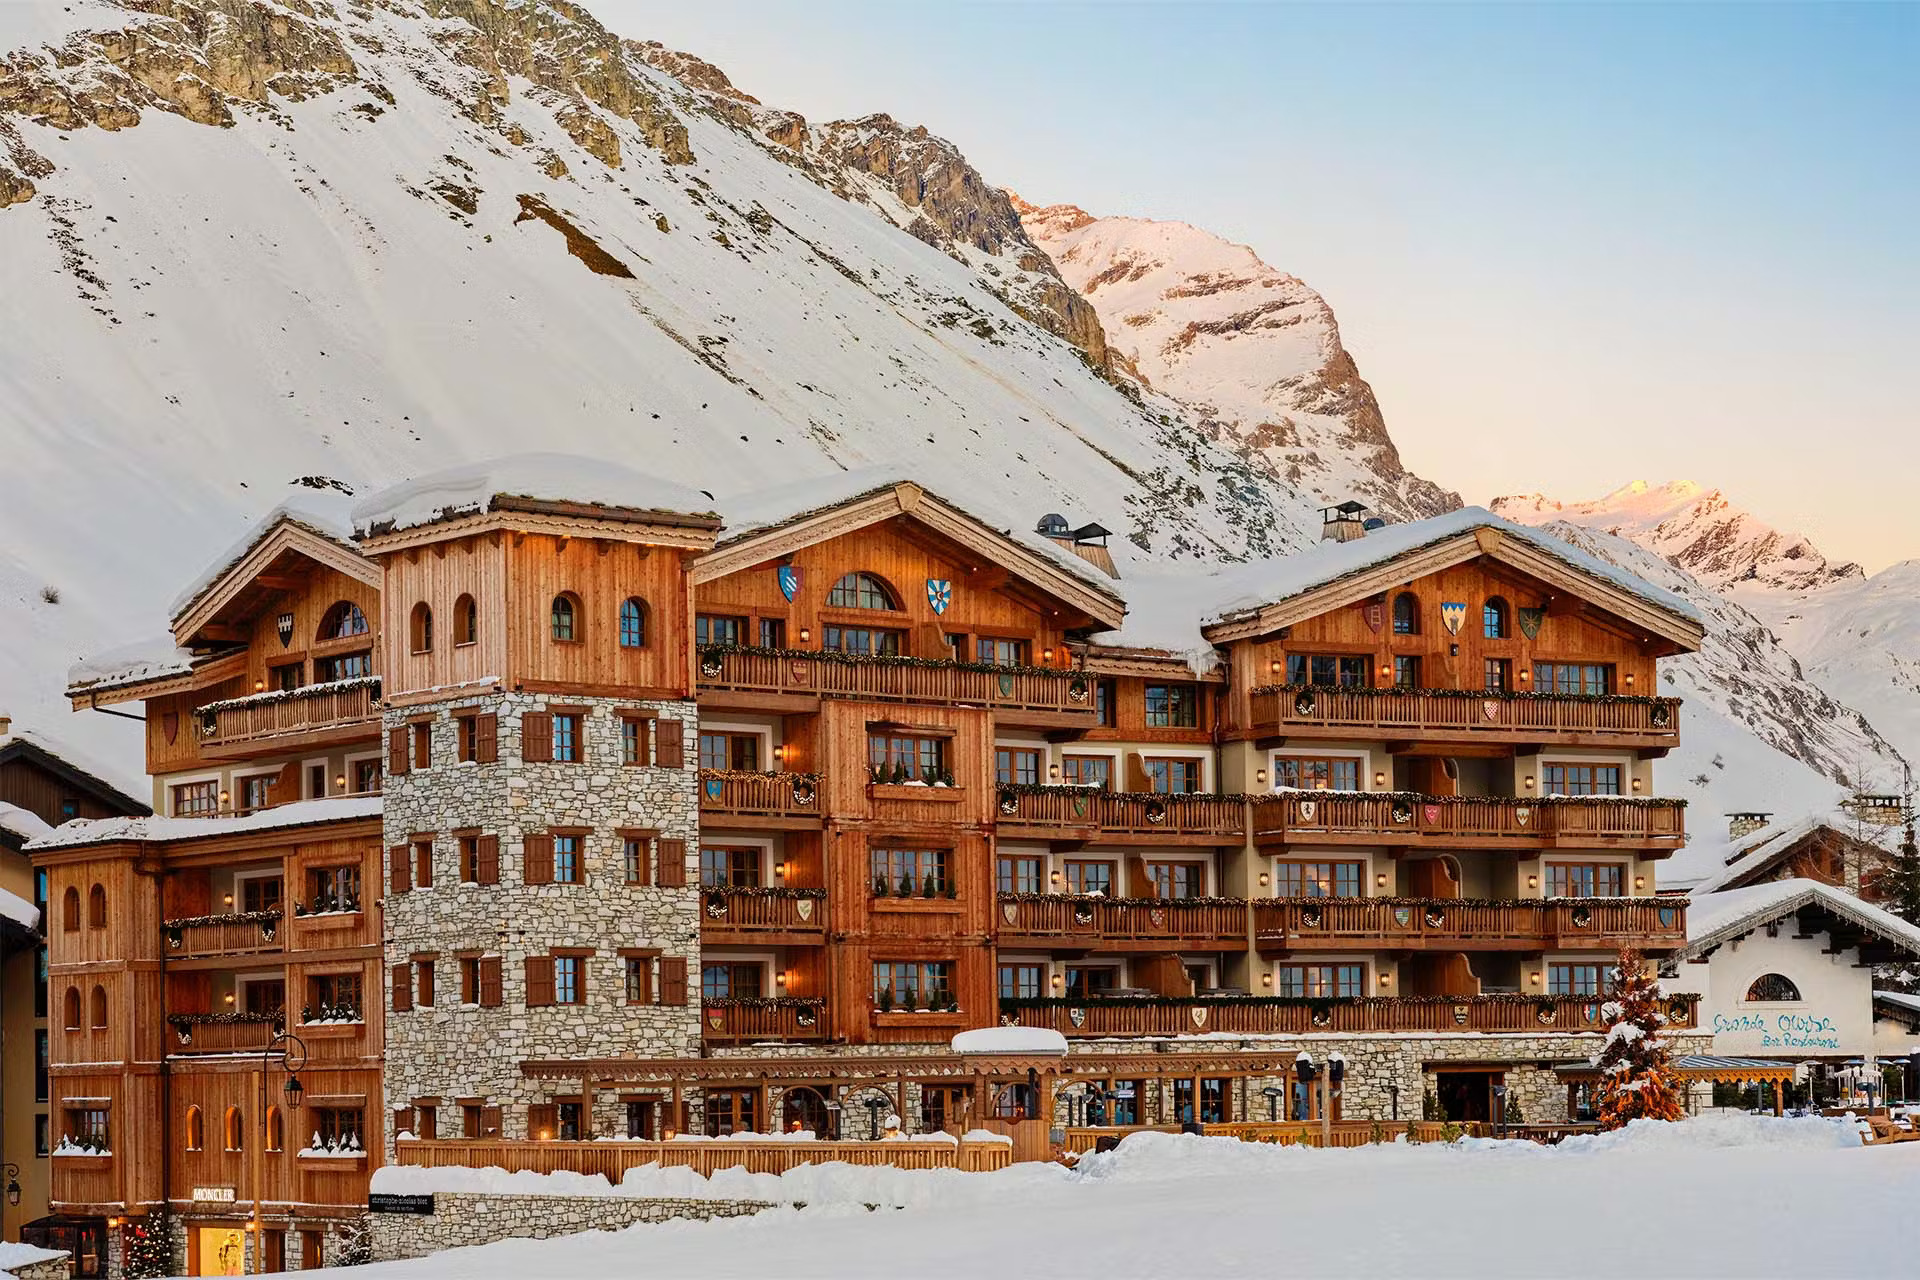 Airelles Val d’Isère offers a luxurious ski-in, ski-out experience in the French Alps